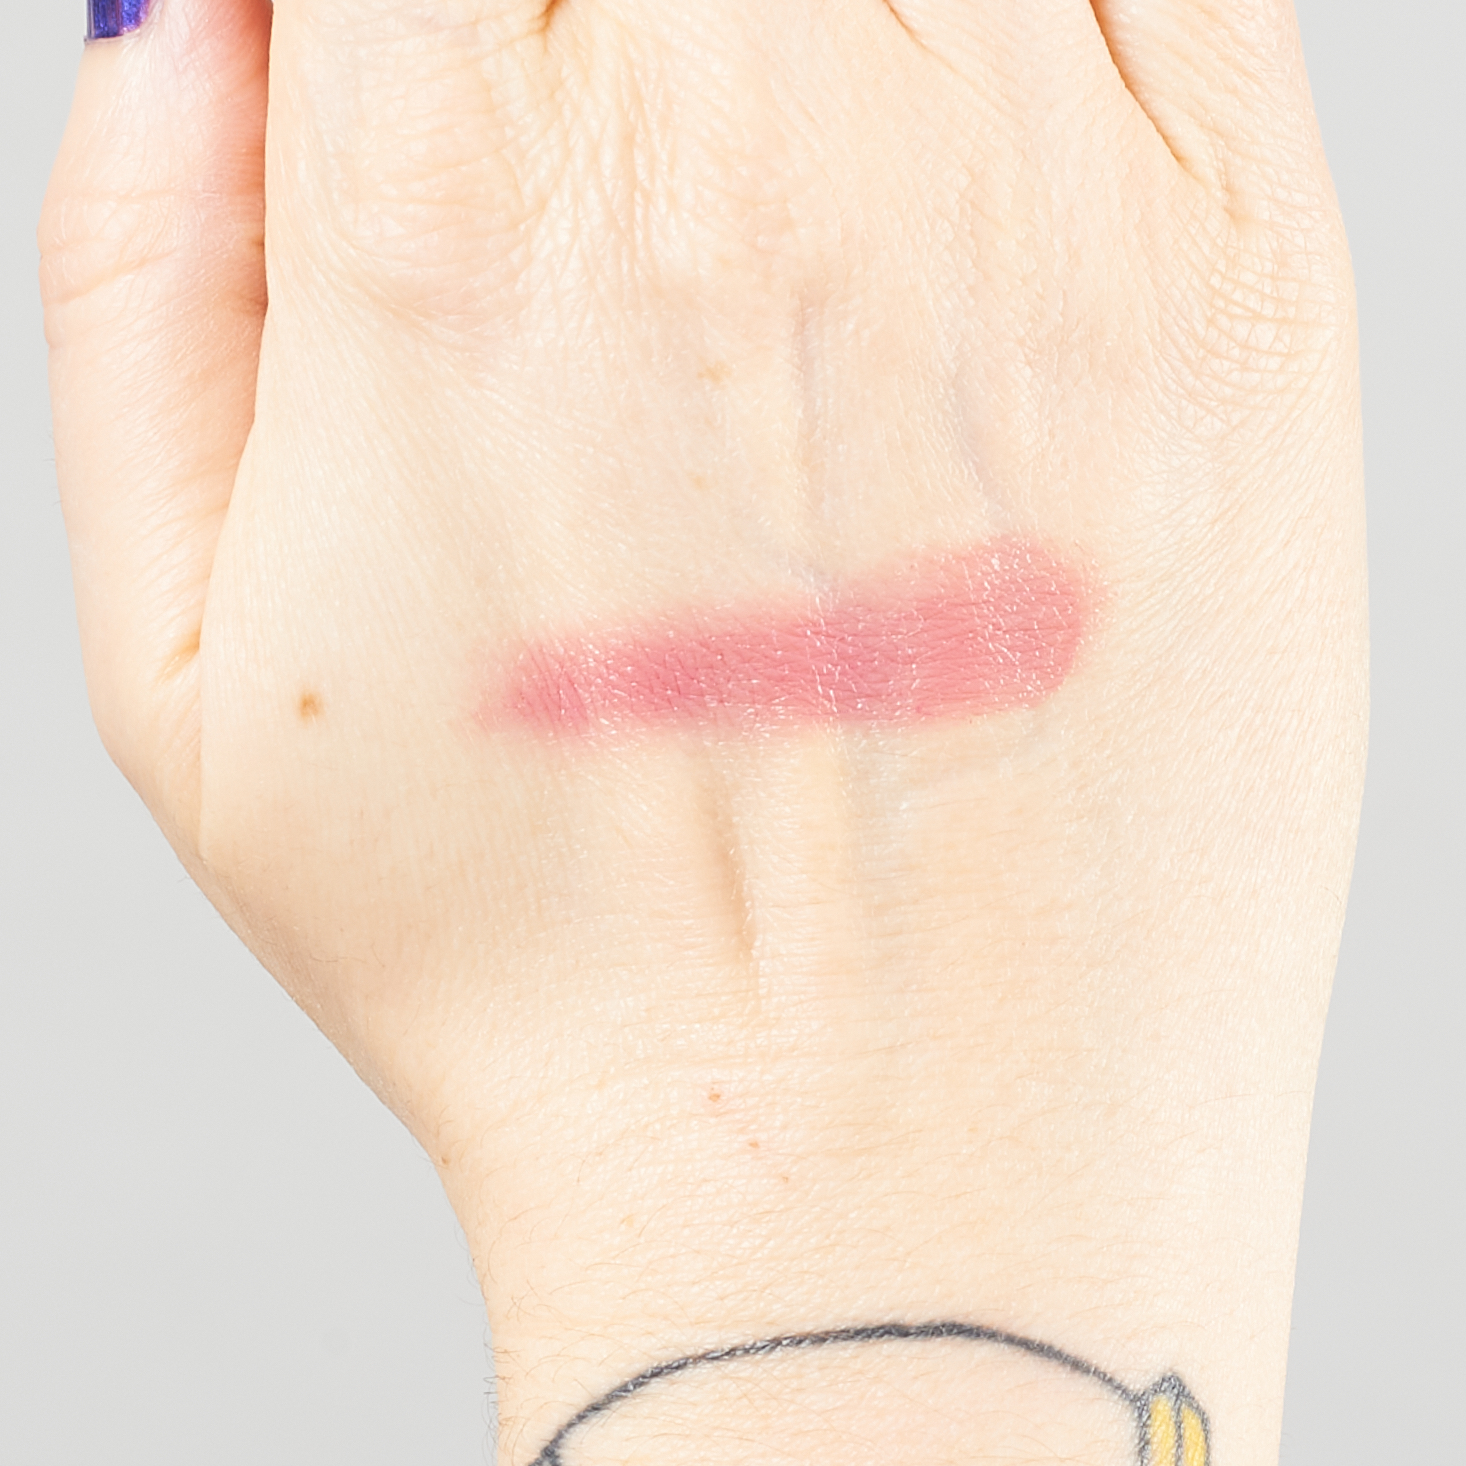 Wander Beauty Double Date Lip & Cheek Tint in Rendezvous swatch on hand